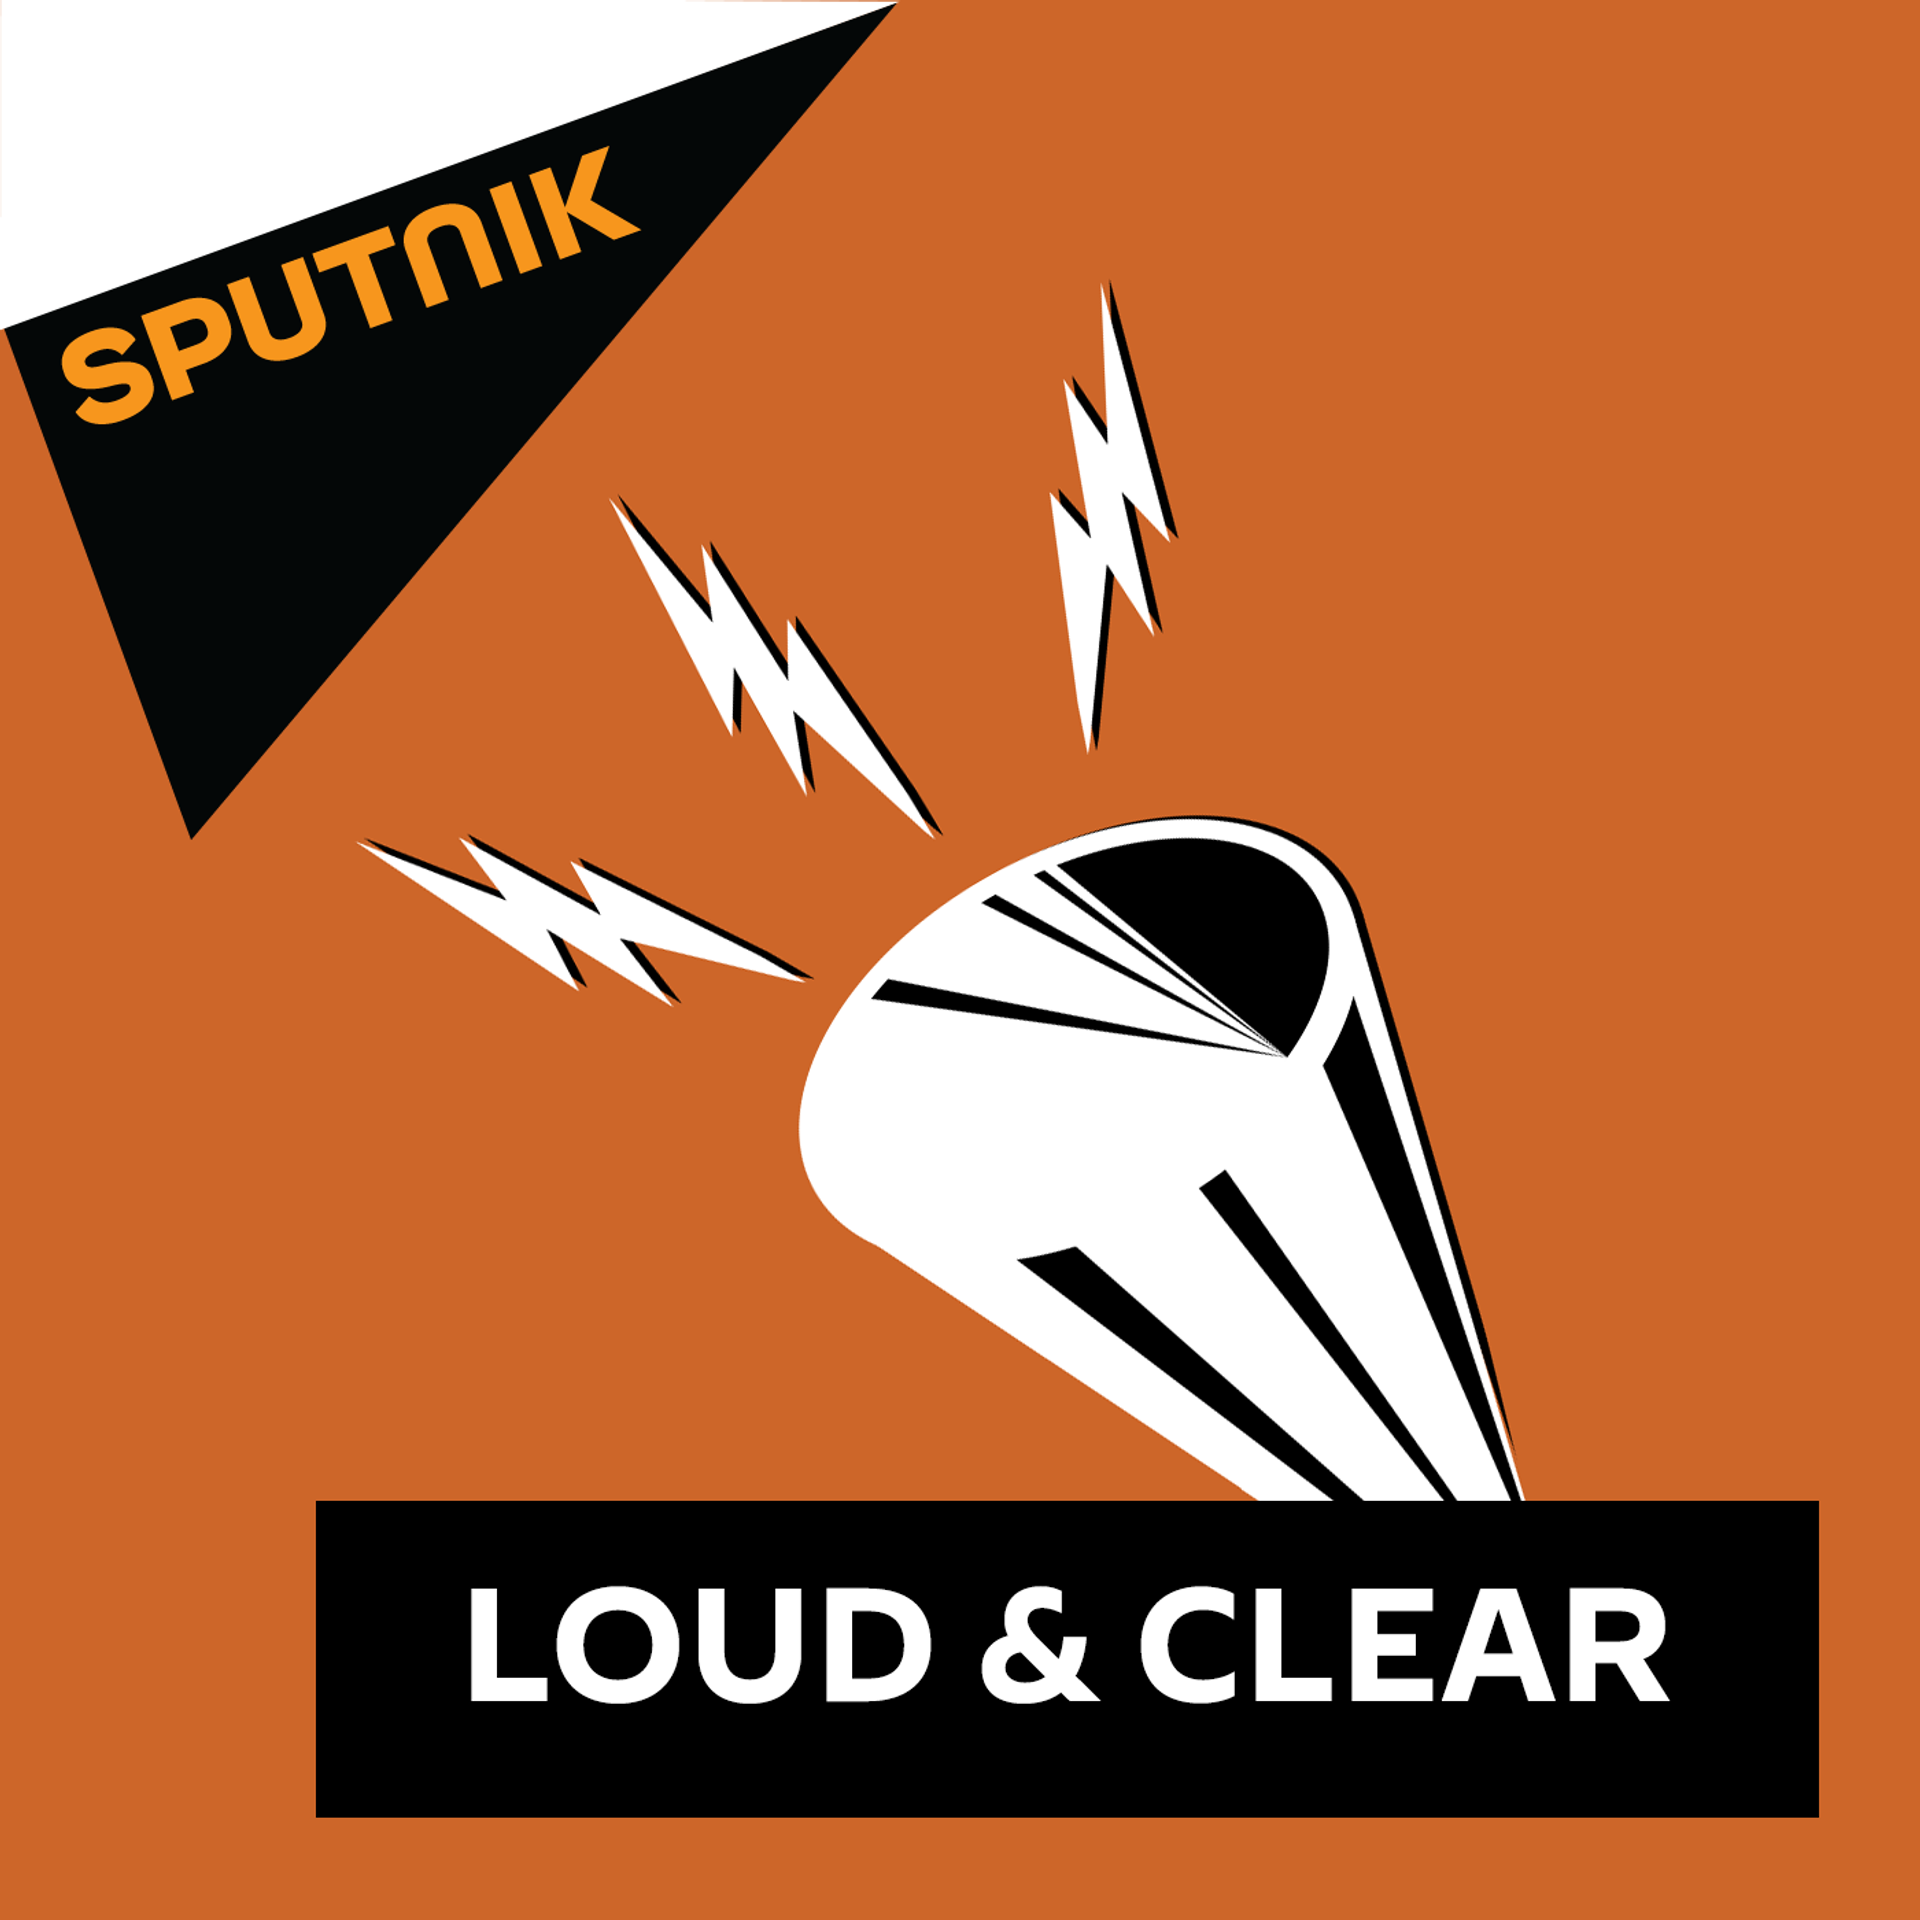 Loud and clear. 5:5 Loud and Clear. Autograph Loud and Clear. Signal - Loud & Clear.